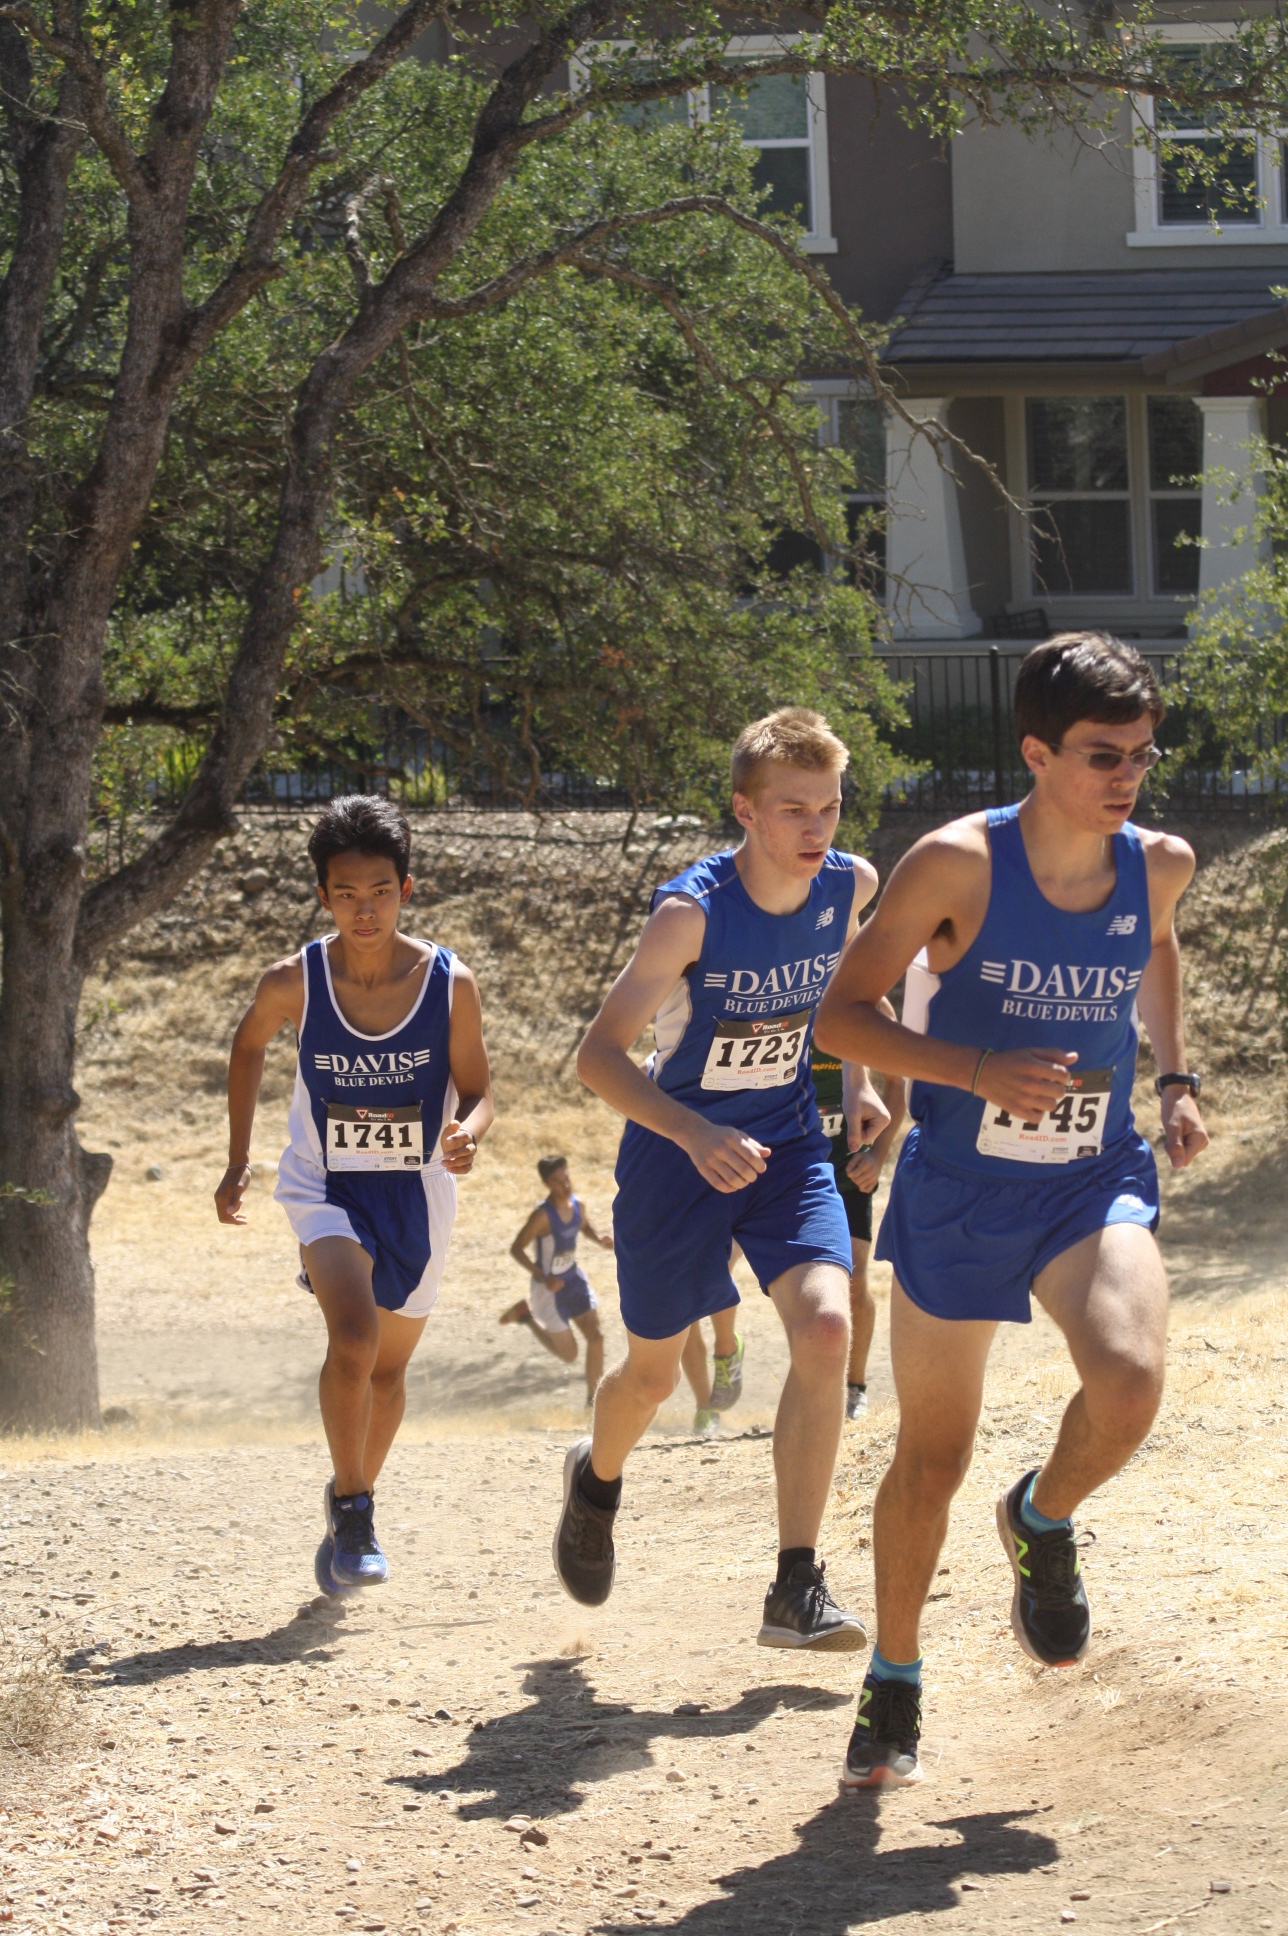 JV runners junior Perry Winsor, junior Stephen Nichols and senior Kyle Tran pace with each other during the first portion of the race.